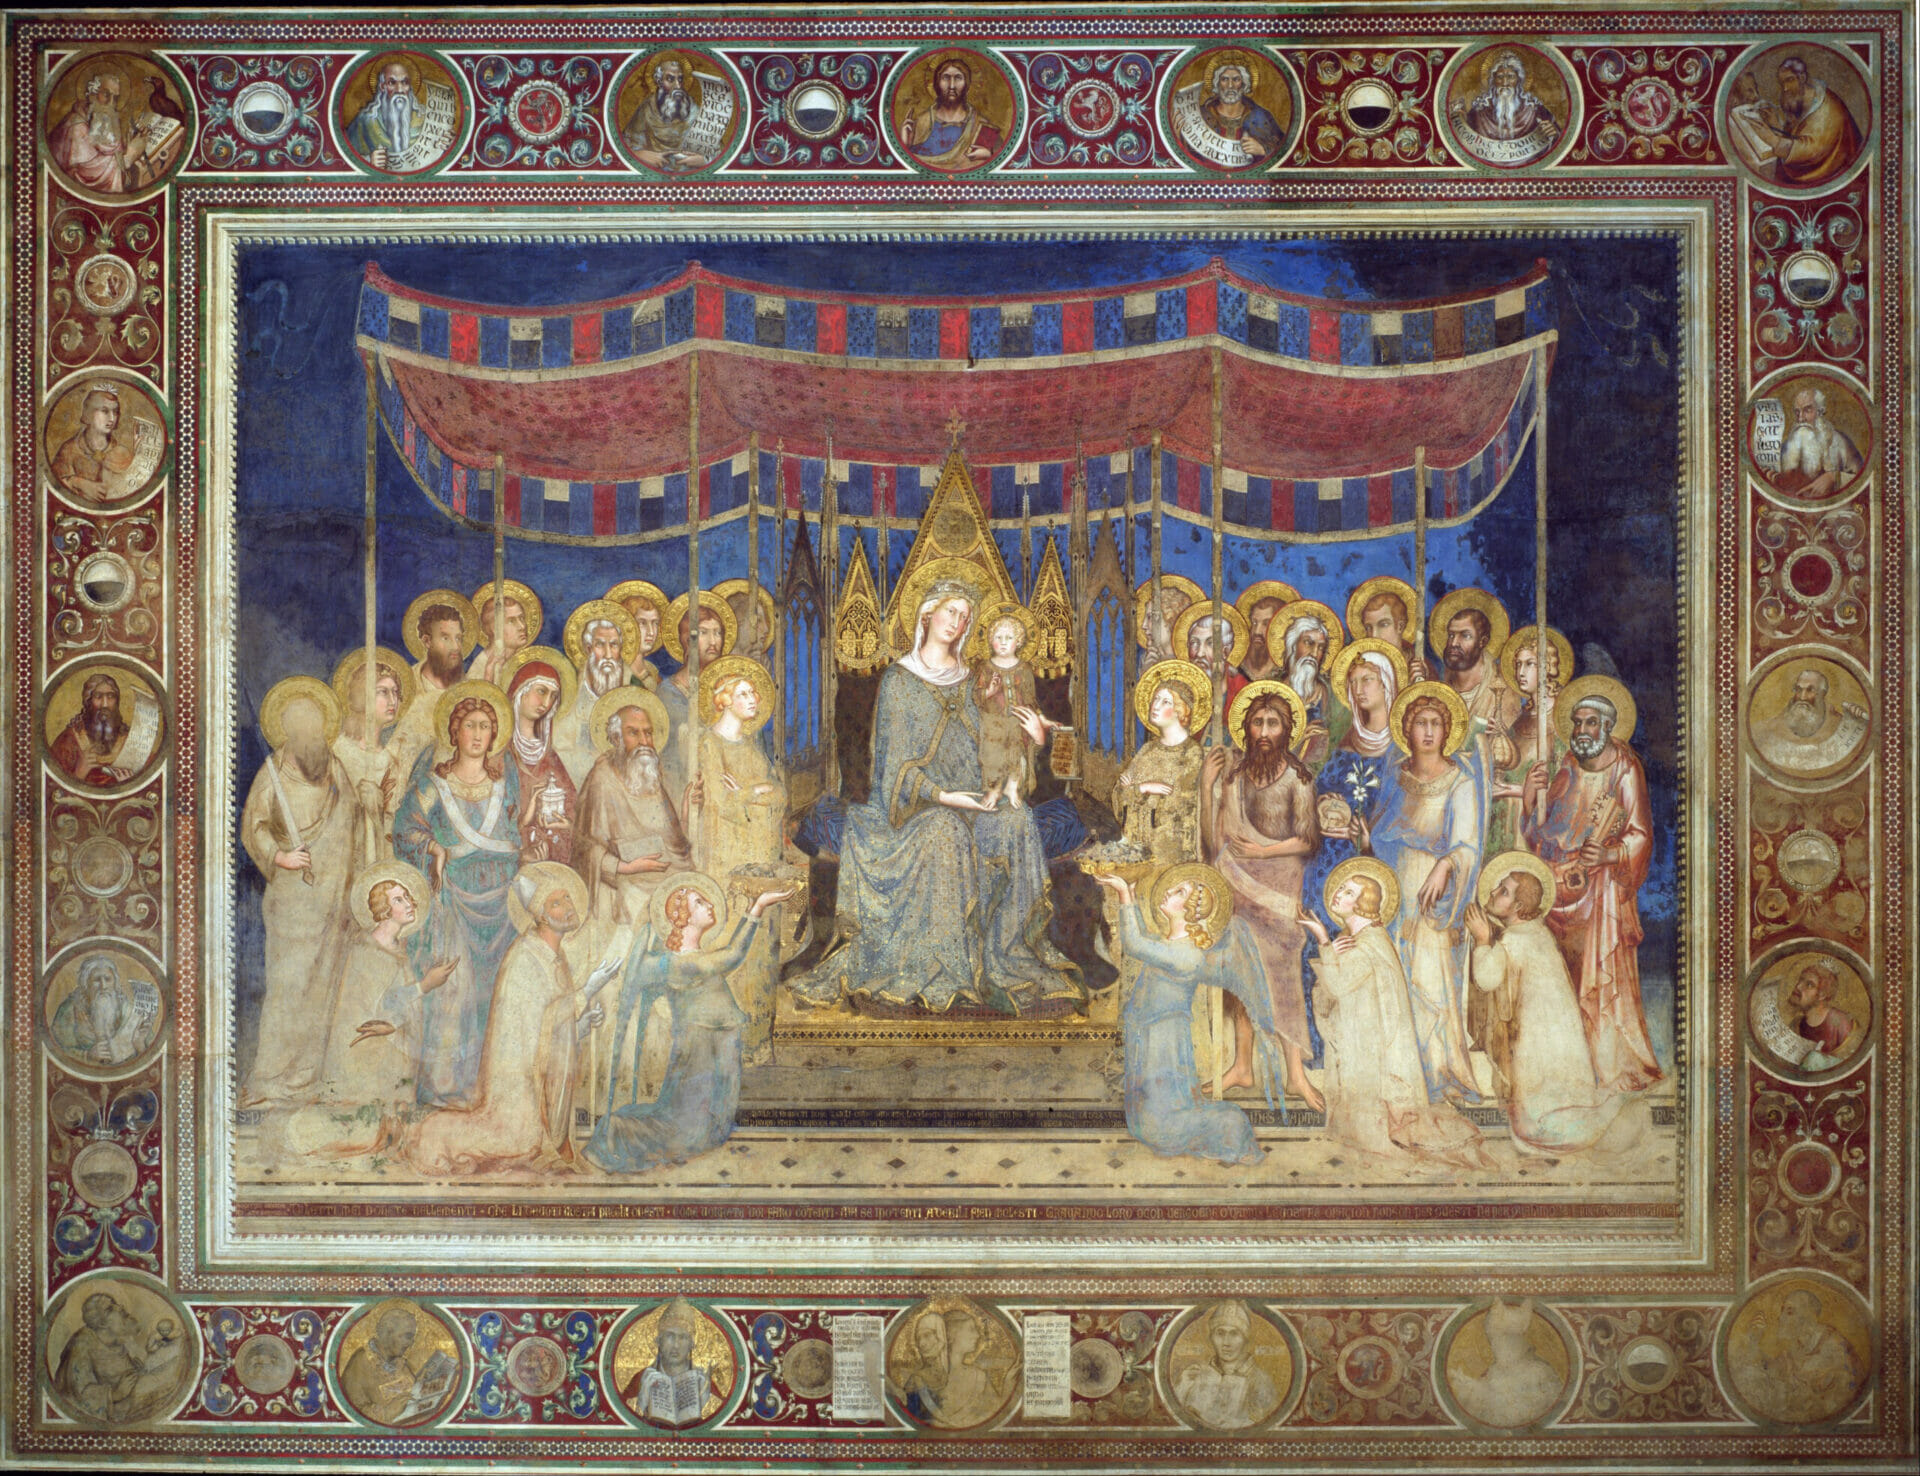 In the Majesty of Simone Martini, Mary and the Saints talk so that everyone can understand. They seek dialogue and contact with the faithful, but above all, with citizens.